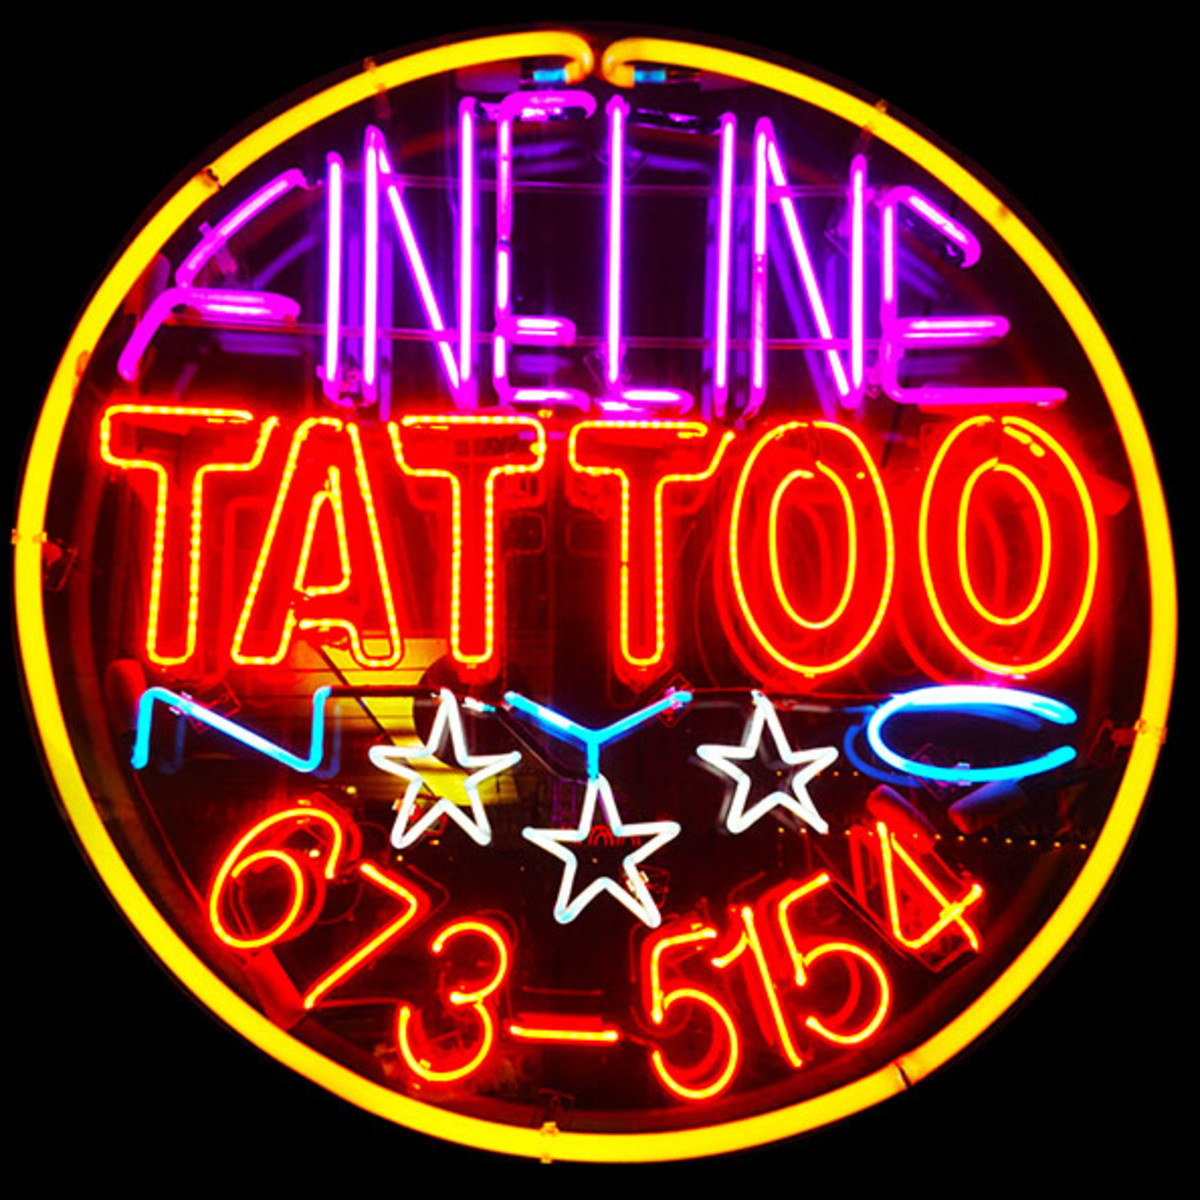 Home_fineline-tattoo-nyc-neon-sign3